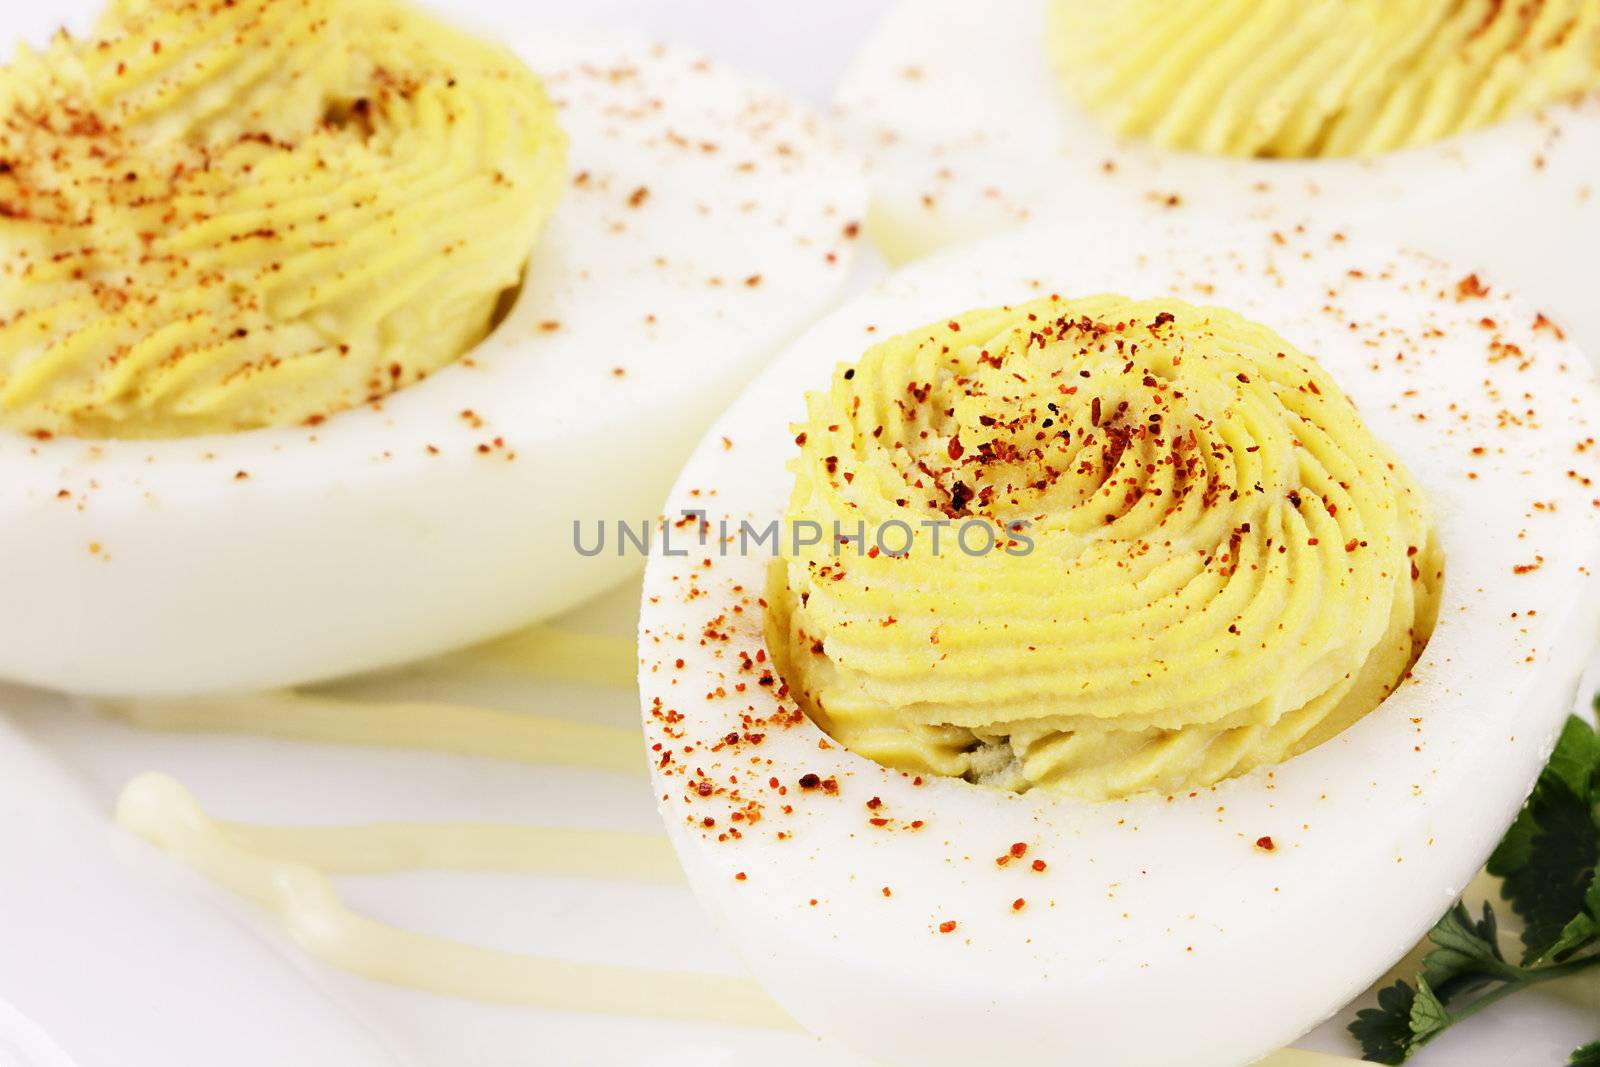 Plate of gourmet deviled eggs with a sprig of parsley over sauce. Extreme shallow depth of field with selective focus on egg in foreground.
